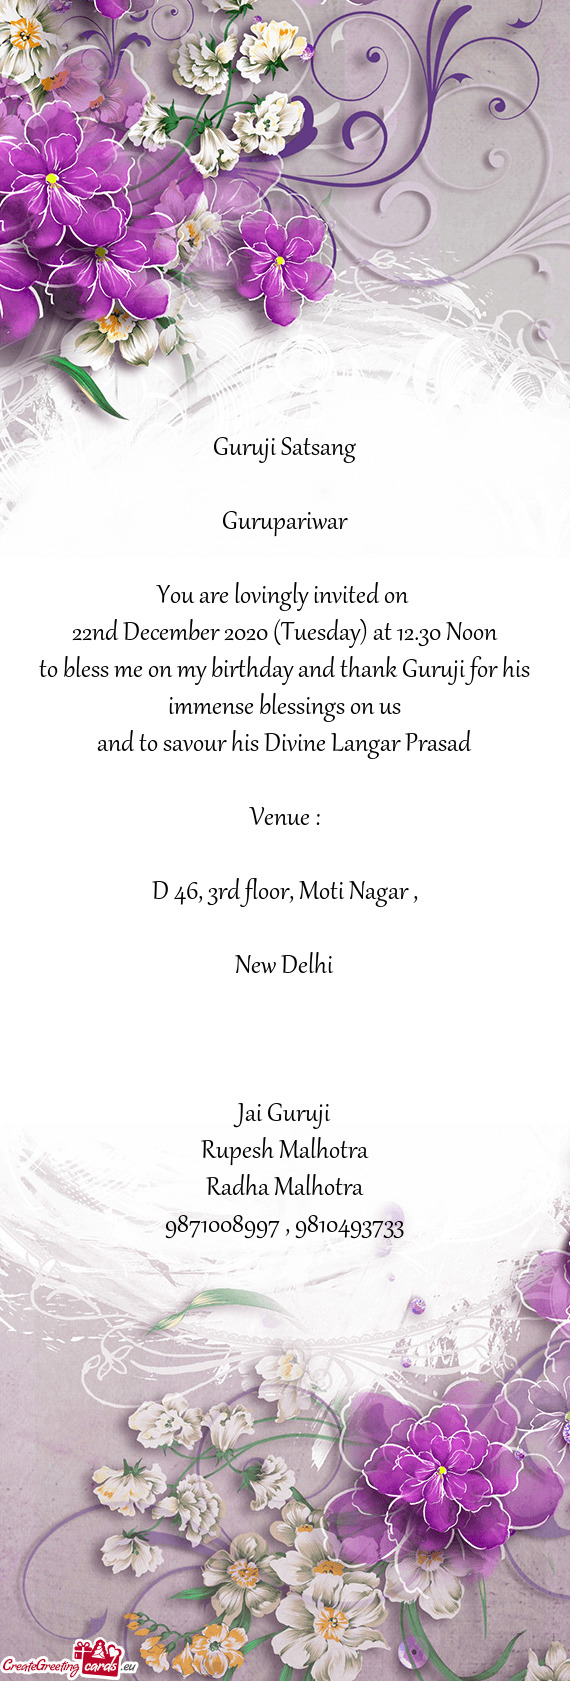 To bless me on my birthday and thank Guruji for his immense blessings on us